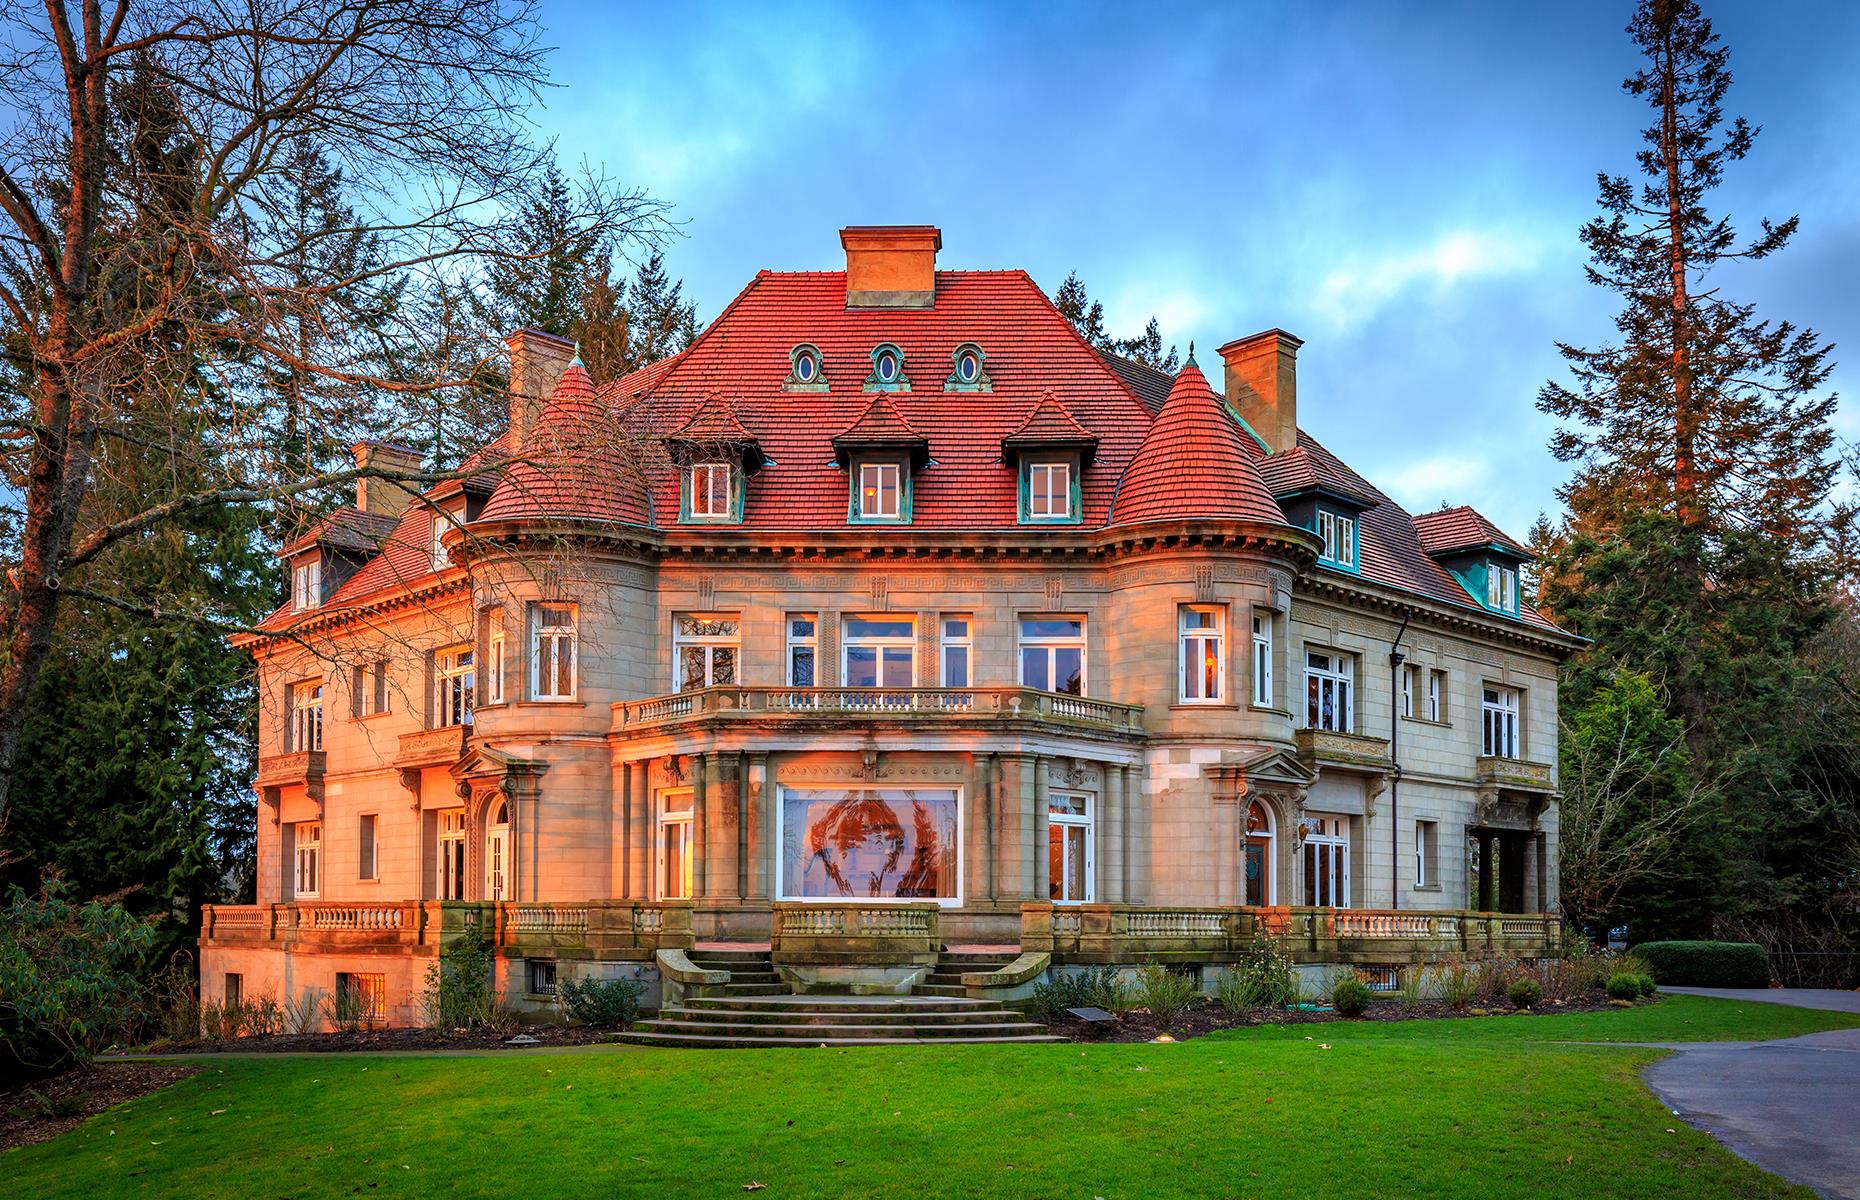 <p><a href="https://pittockmansion.org/">This elegant, early-20th century mansion</a> was the vision of successful newspaper publisher Henry Pittock, who lived here with his family from 1914. But when Pittock passed away, and his family moved on, the mansion ended up deserted and decaying for several years. Though it was eventually restored and opened to the public, the pile apparently hasn't been able to shake the spirits of the past. It's said that the amiable ghosts of Henry, his wife Georgiana and their groundskeeper all call the mansion home. Staff and visitors have reported hearing them stomping around the estate's upper floors and smelling Georgiana's rose perfume.</p>